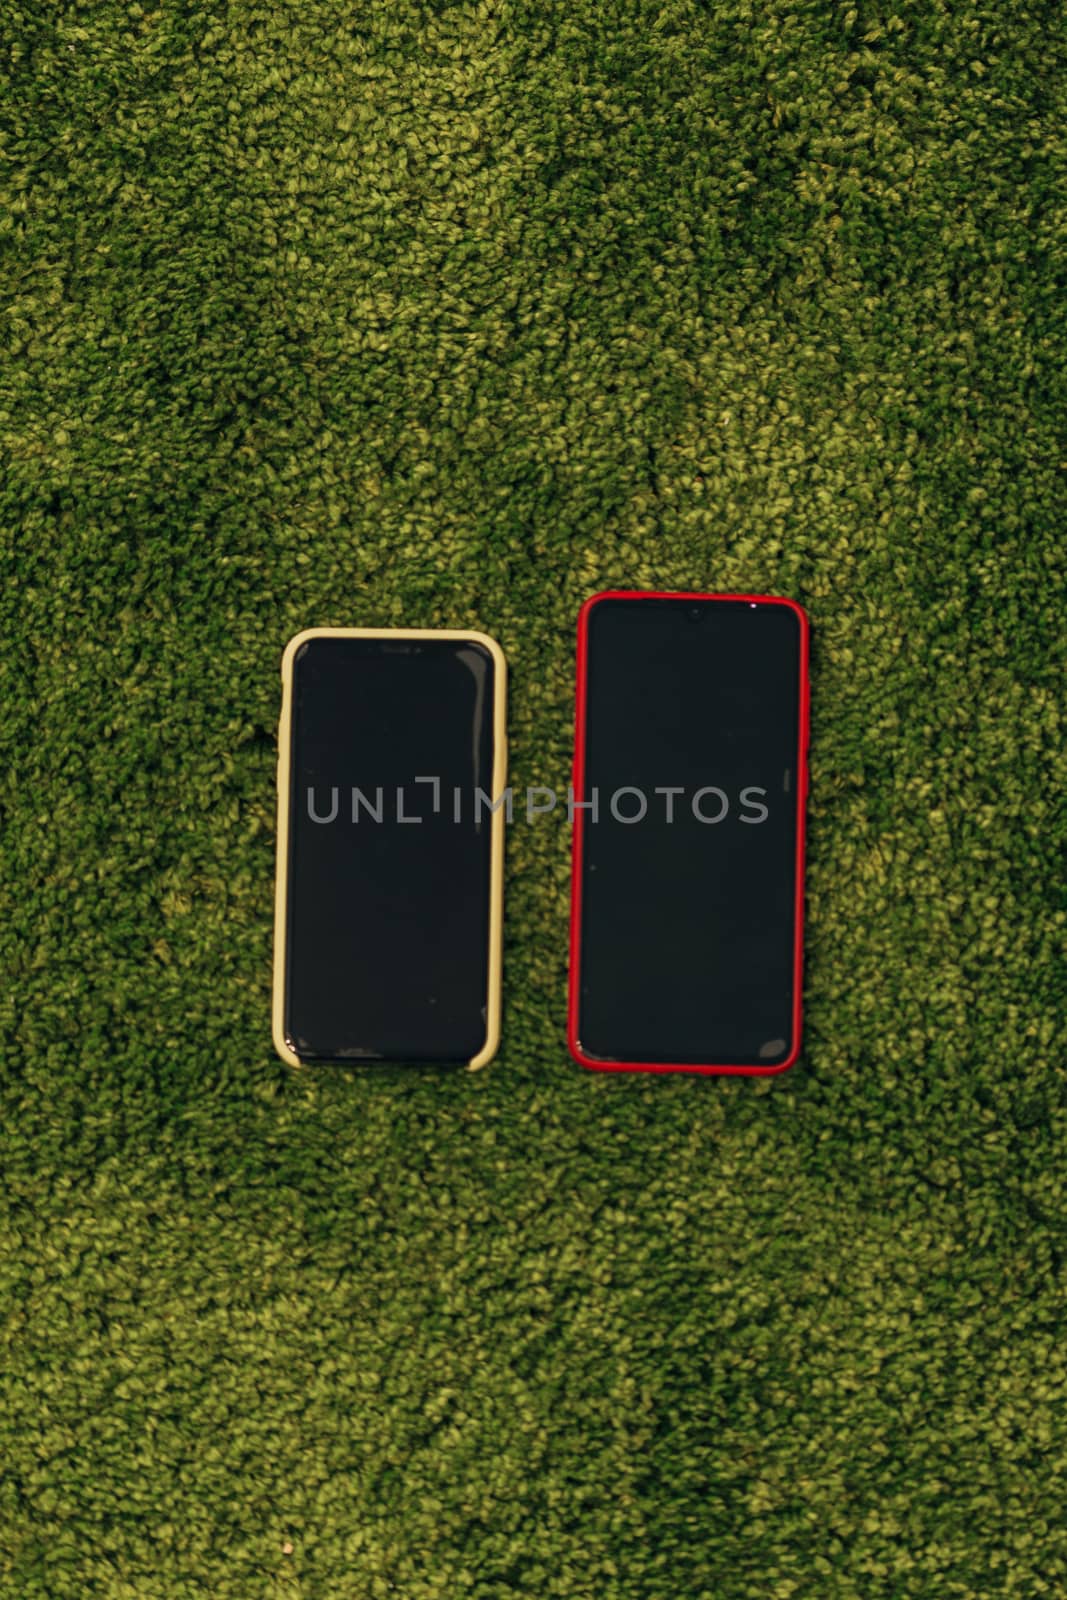 Two Generations of Smartphones on Grass.